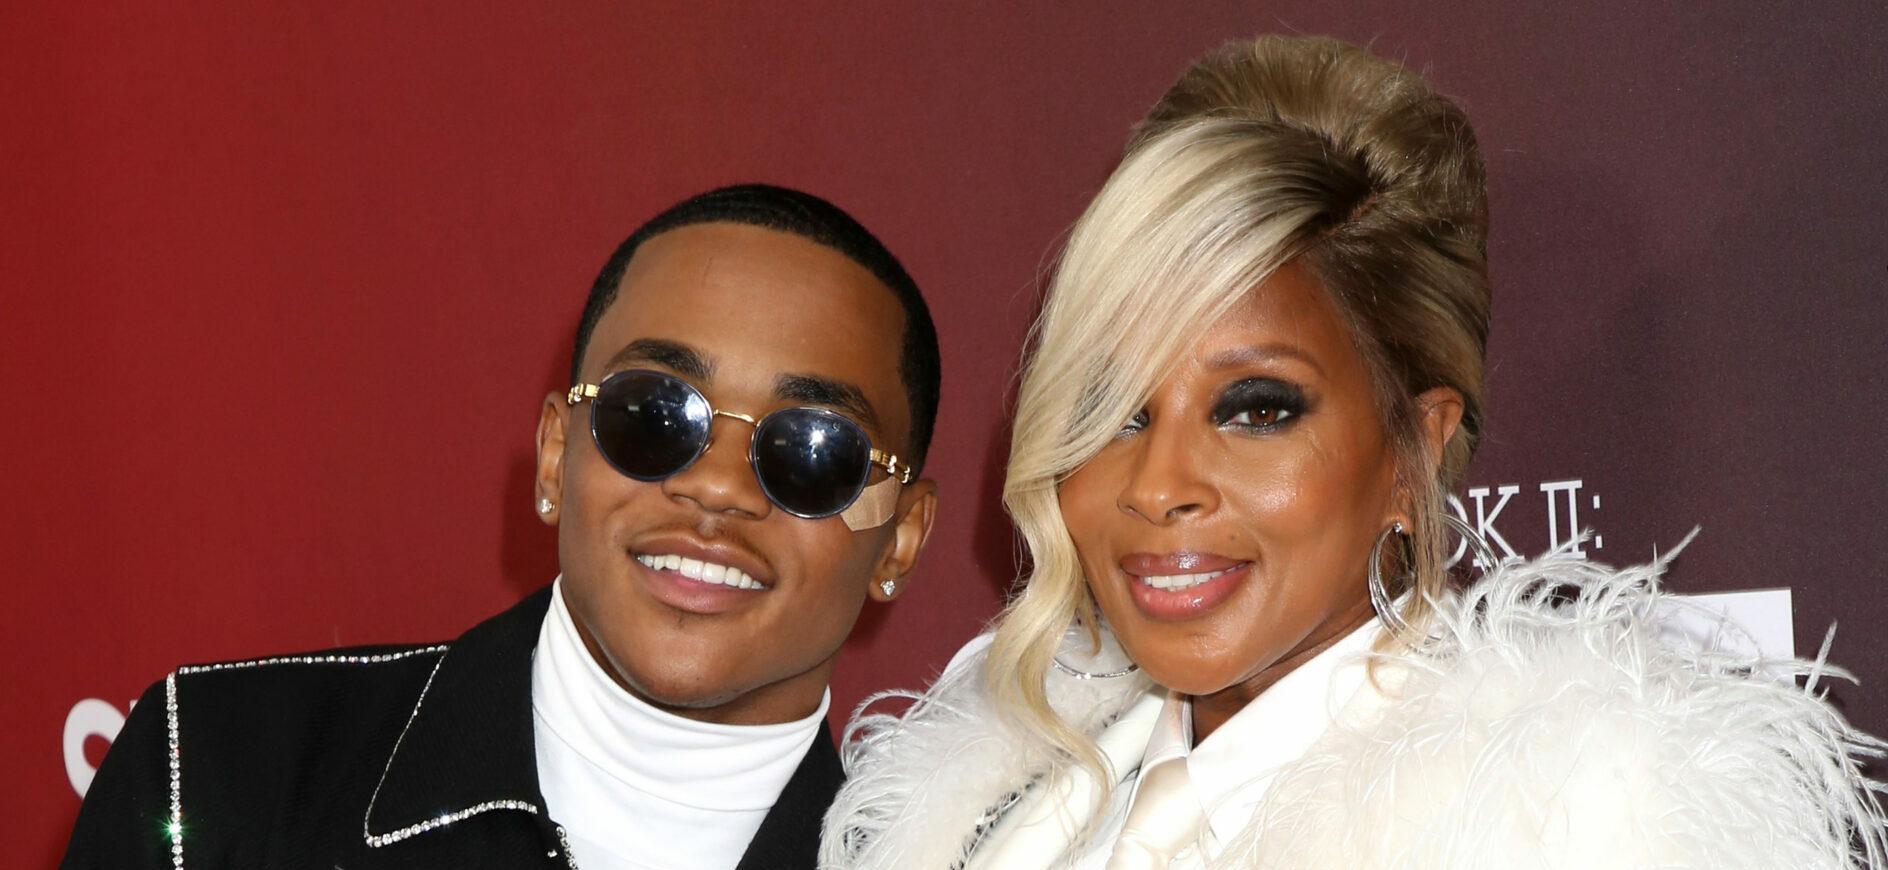 'Power Book II: Ghost' Season 2 Premiere held at the SVA Theatre on November 17, 2021 in New York City, NY ©Steven Bergman/AFF-USA.COM. 17 Nov 2021 Pictured: Michael Rainey Jr. and Mary J. Blige.